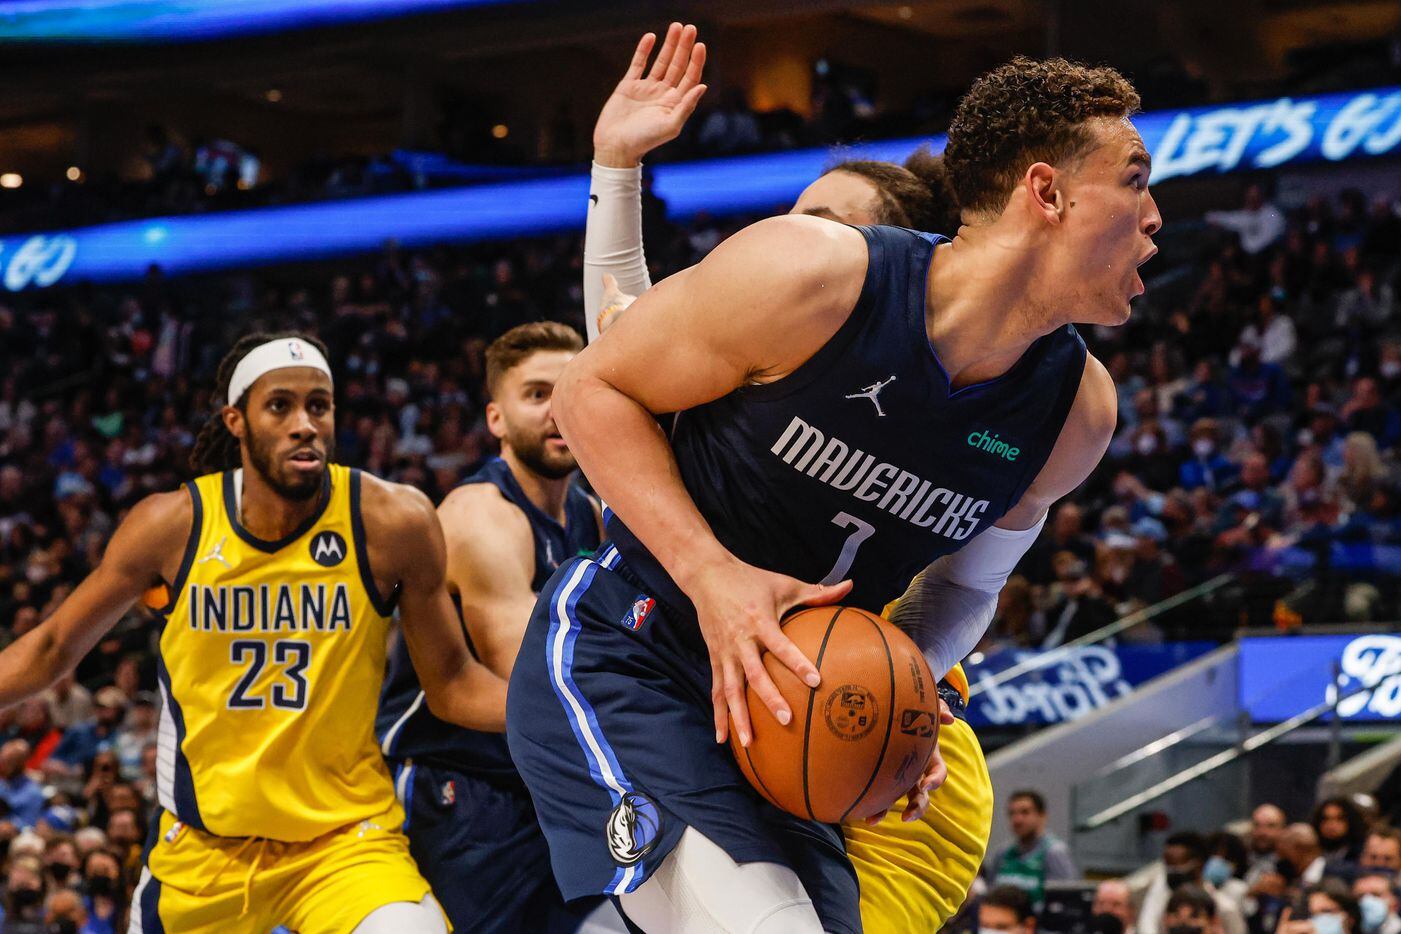 Dallas Mavericks center Dwight Powell (7) drives to the basket against the Indiana Pacers during the second half at the American Airlines Center in Dallas on Saturday, January 29, 2022.